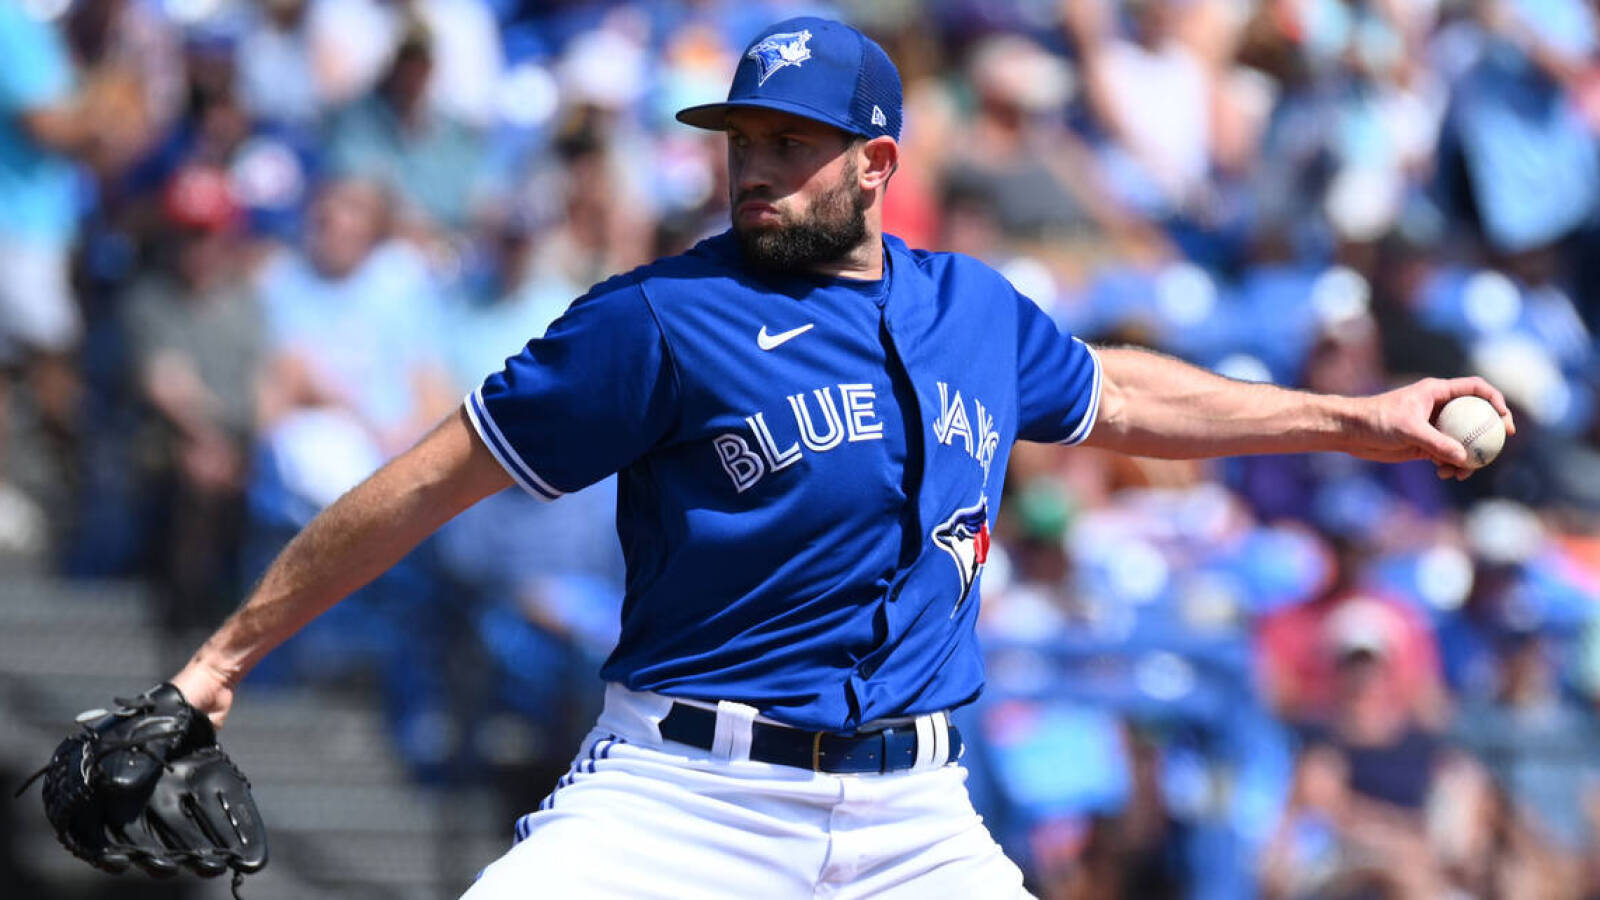 Watch: Blue Jays pitcher fulfills punishment from fantasy football league